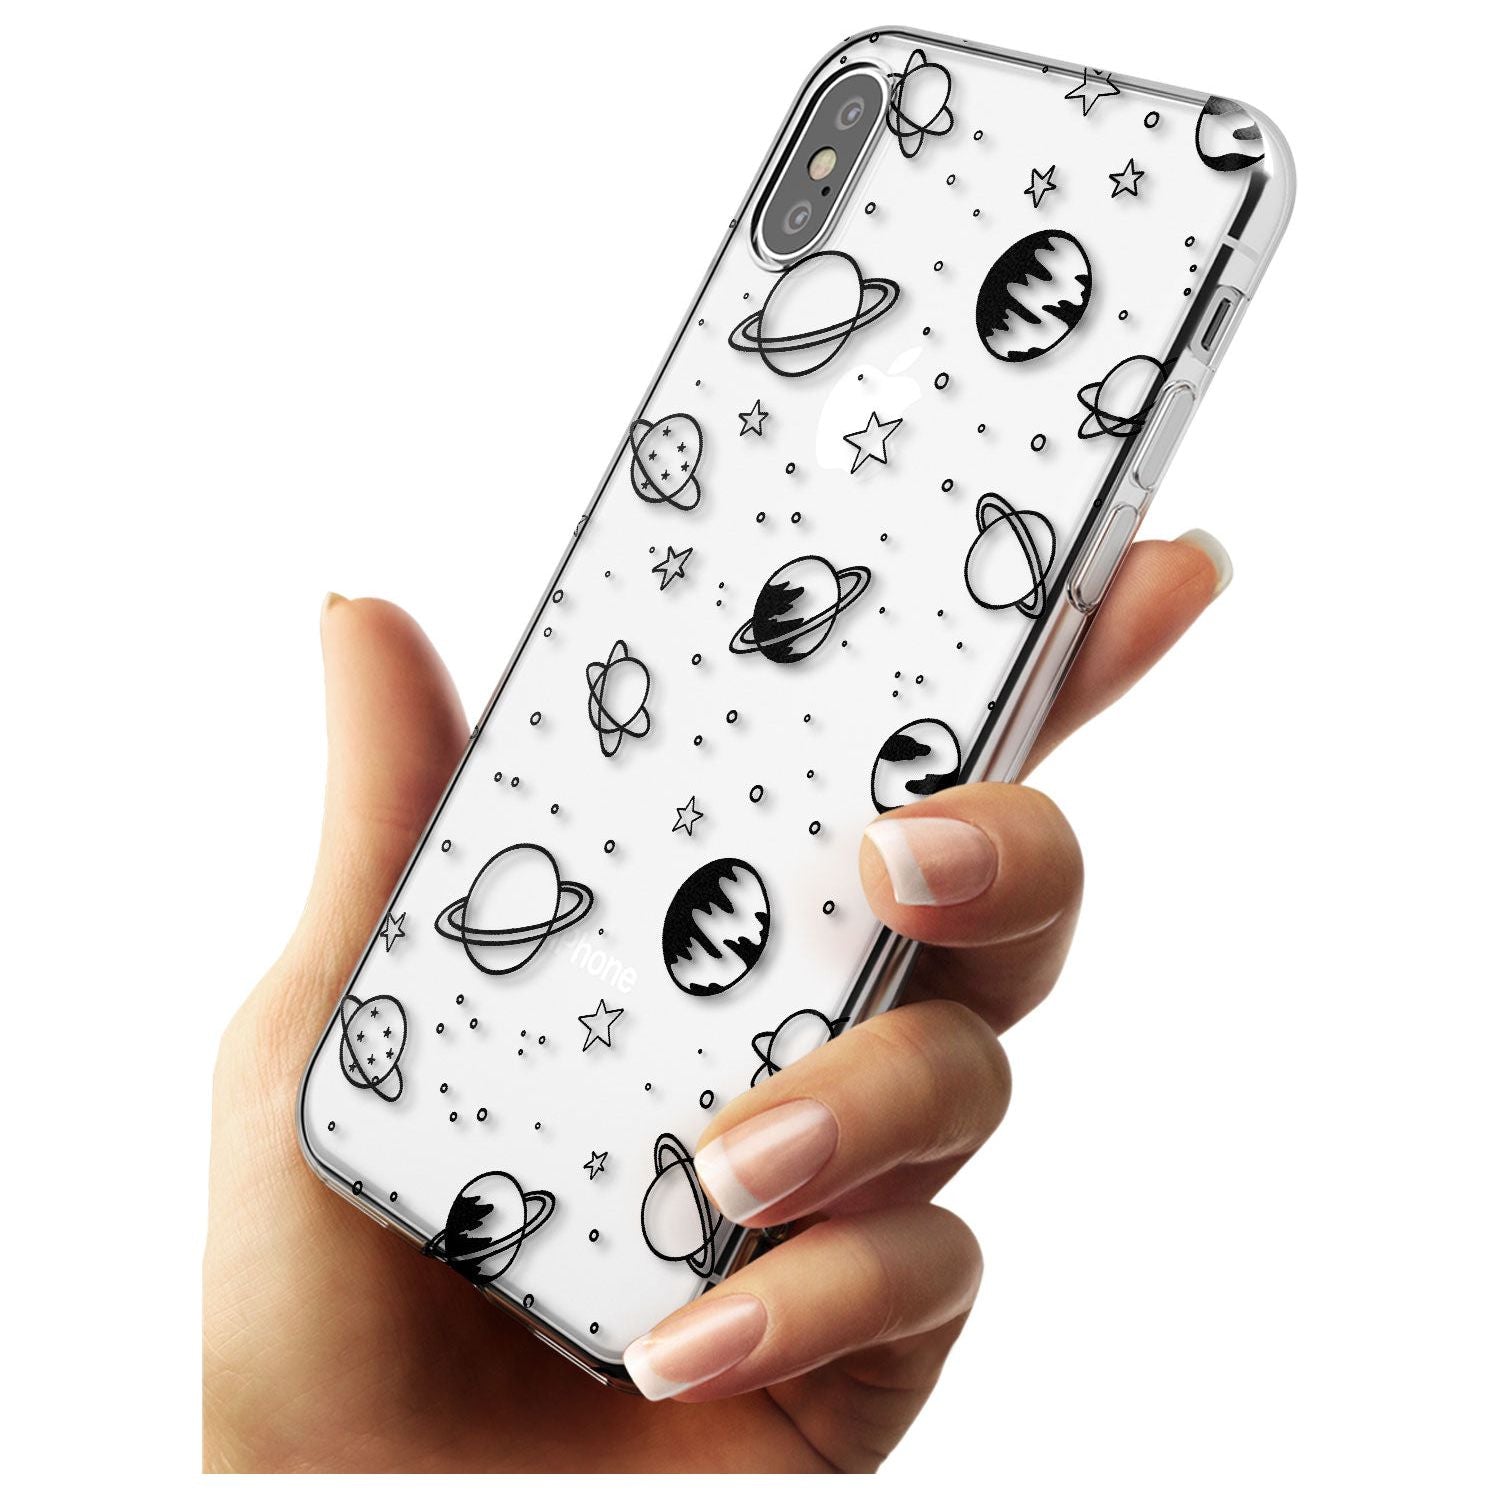 Outer Space Outlines: Black on Clear Black Impact Phone Case for iPhone X XS Max XR